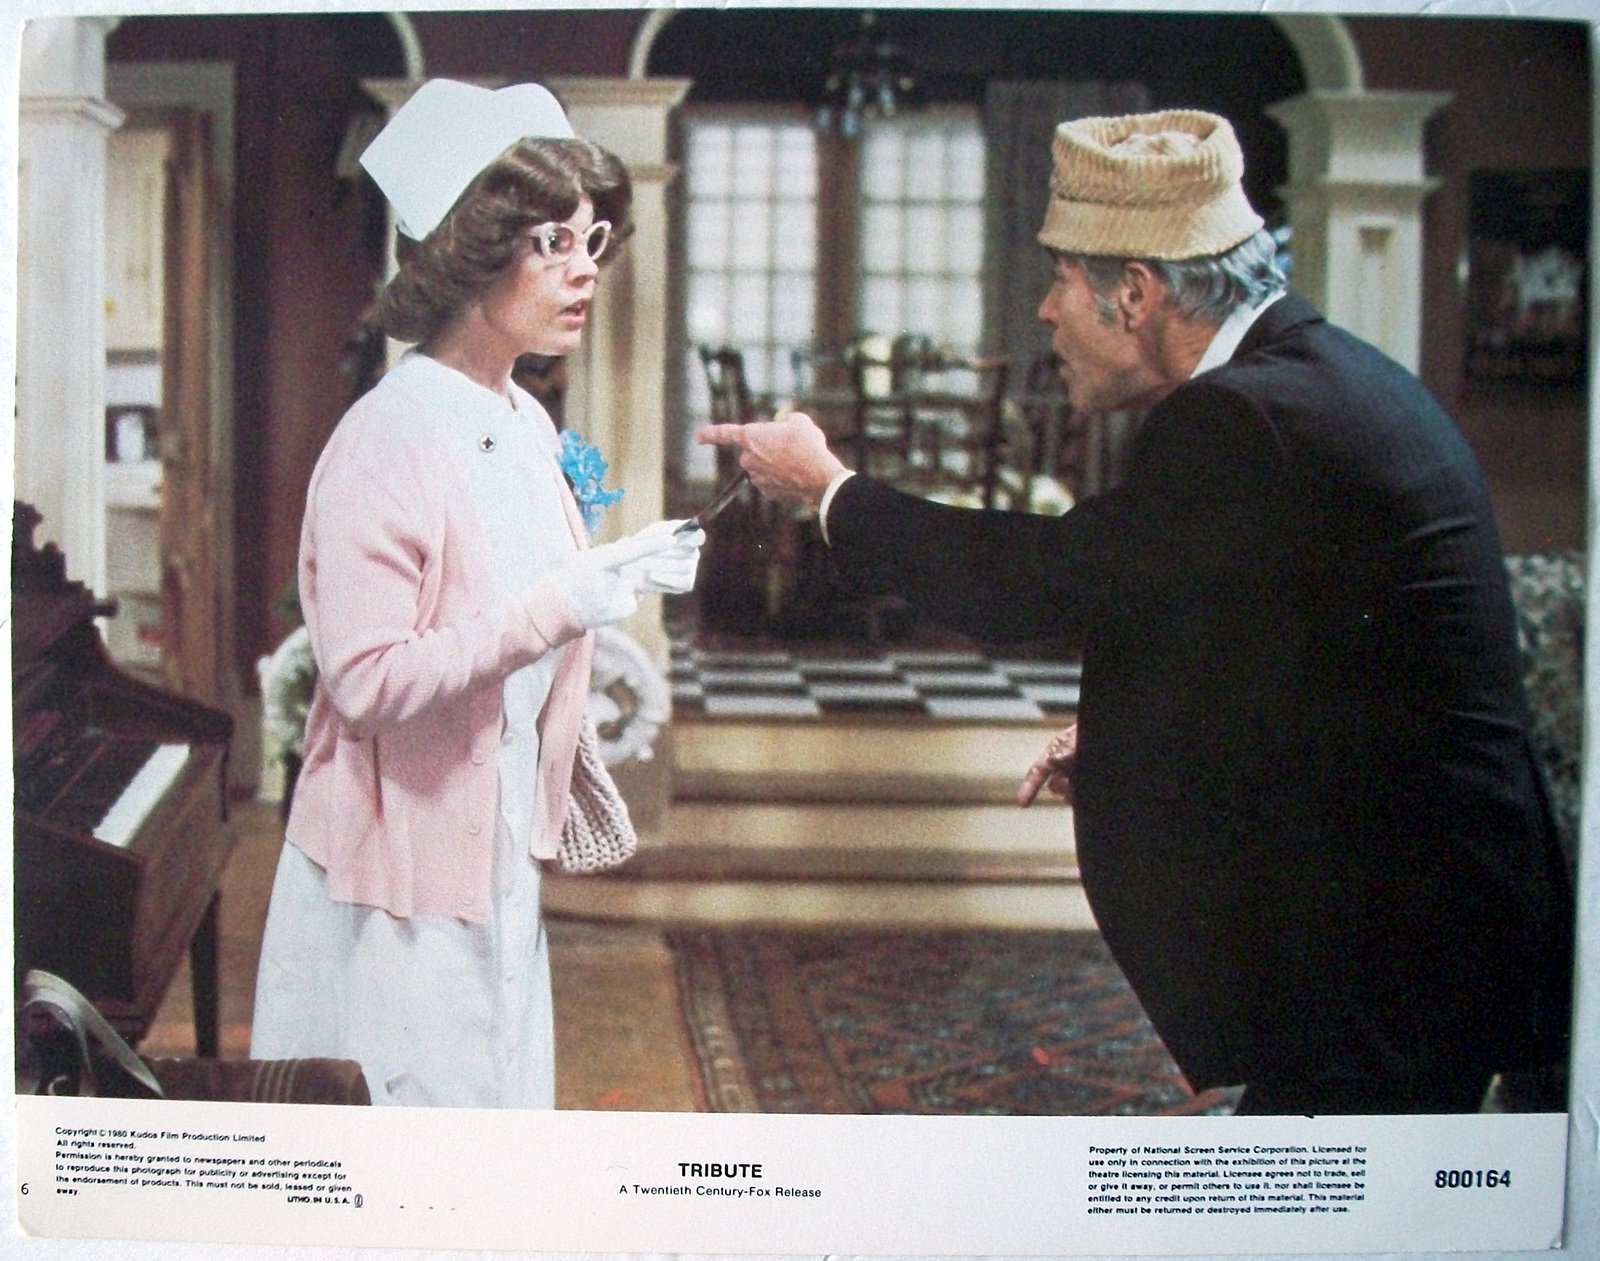 Primary image for TRIBUTE ~ Jack Lemmon, 20th Century Fox, Card 6, 800164, 1980 ~ LOBBY CARD